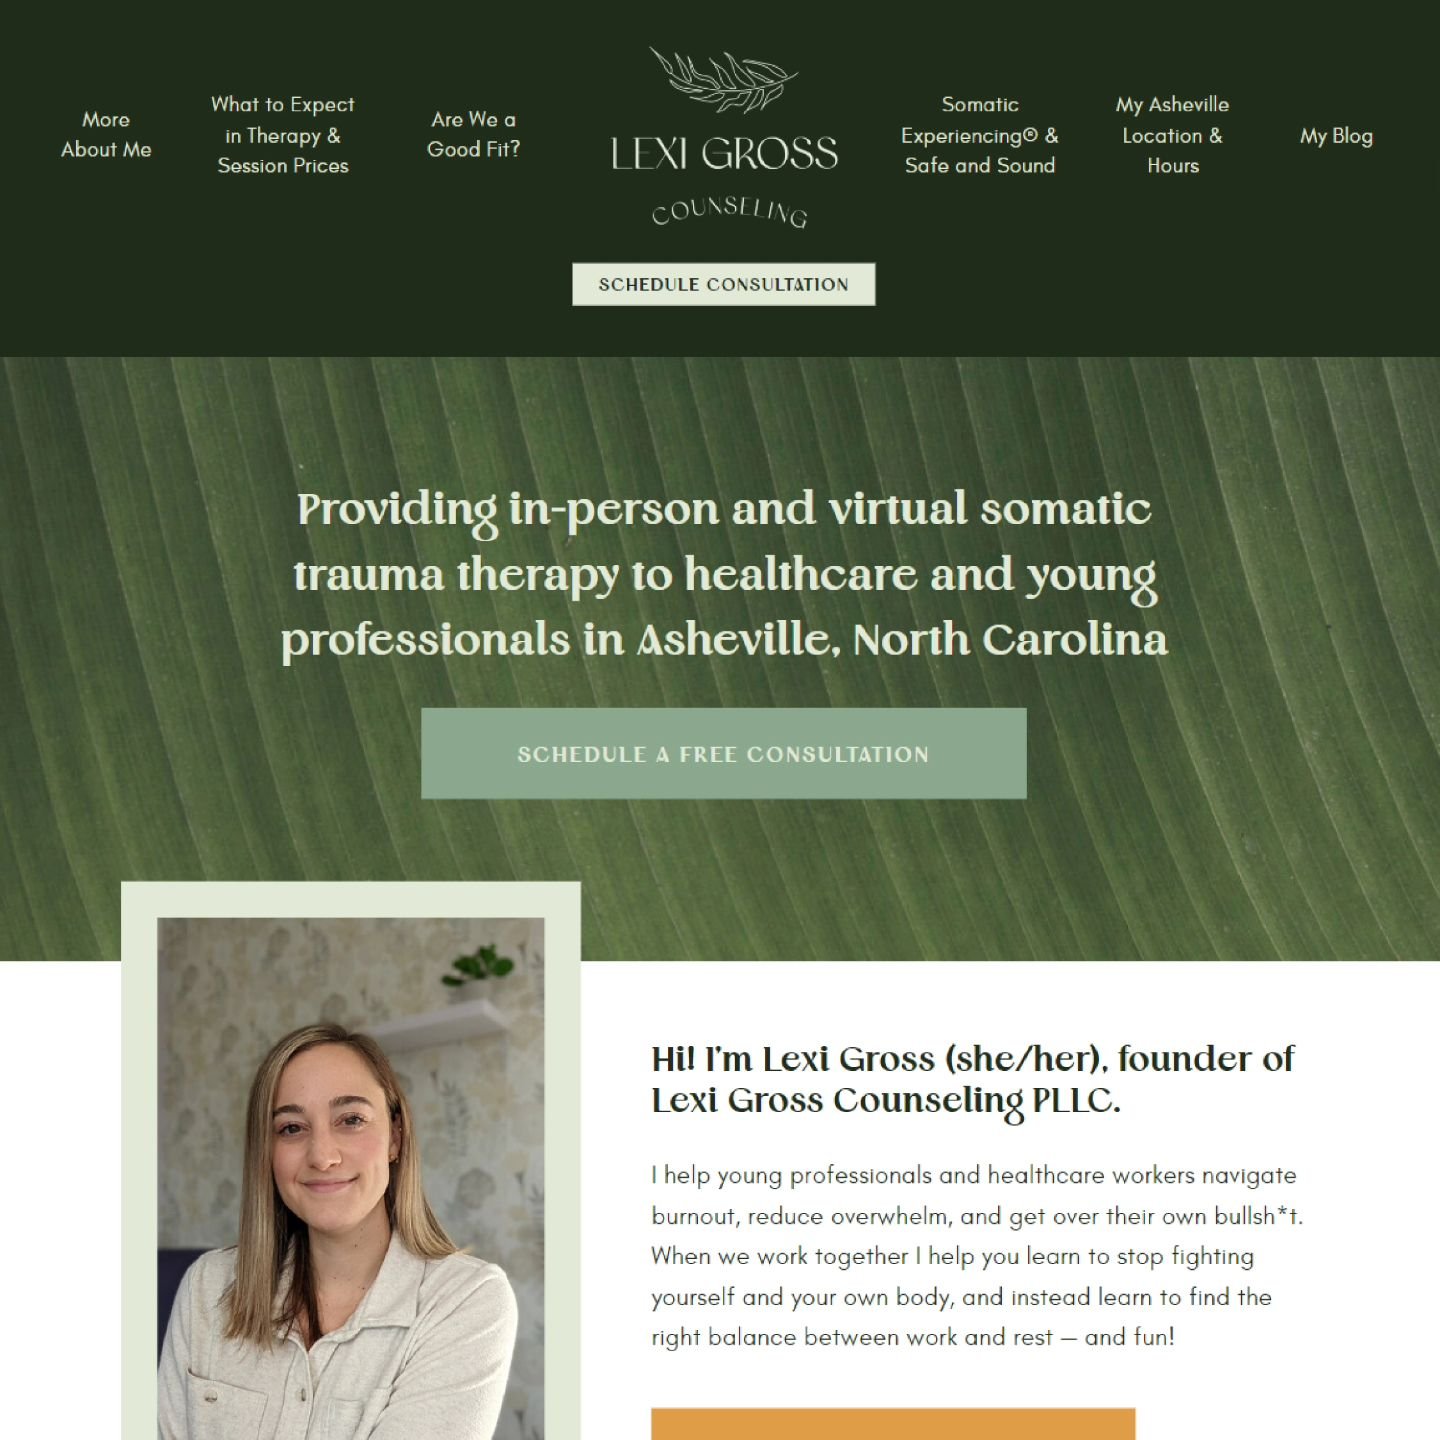 Lexi&rsquo;s website highlights her unique and important specialization in Somatic Experiencing&reg; (SE&trade;) based therapy for burnout, chronic pain, chronic illness, and trauma &ndash; as well as her love of nature and its role in therapeutic he